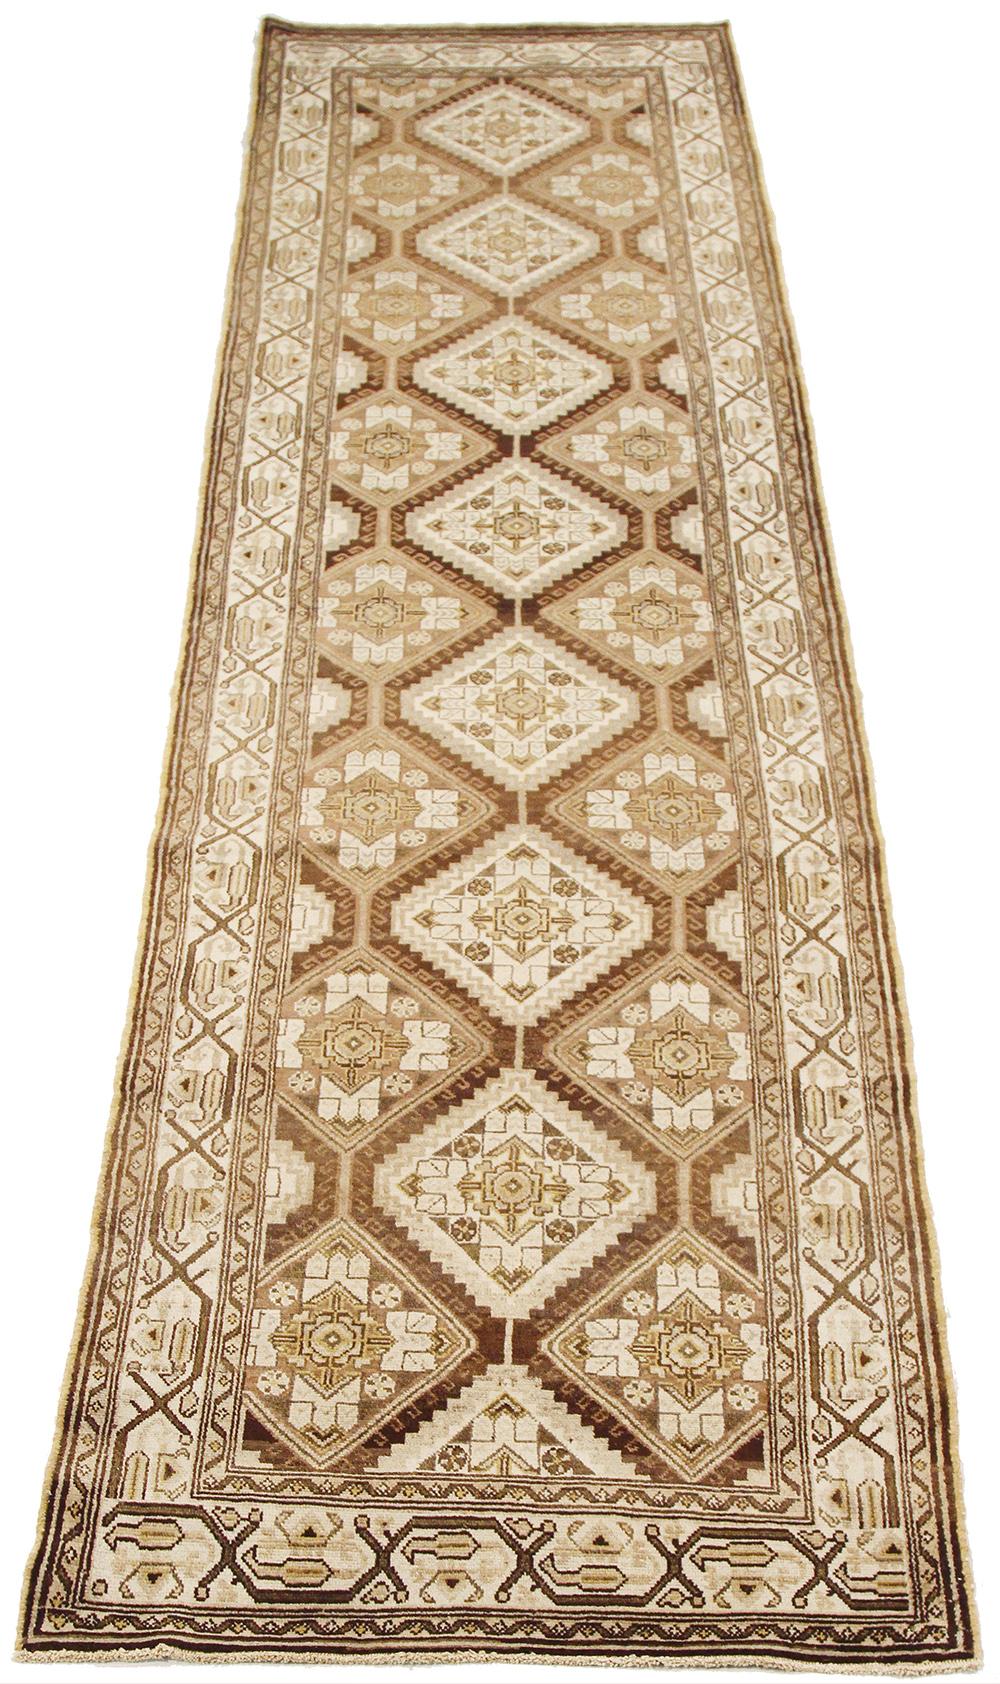 Antique Persian runner rug handwoven from the finest sheep’s wool and colored with all-natural vegetable dyes that are safe for humans and pets. It’s a traditional Sarab design featuring medallion details in ivory and beige over a brown field. It